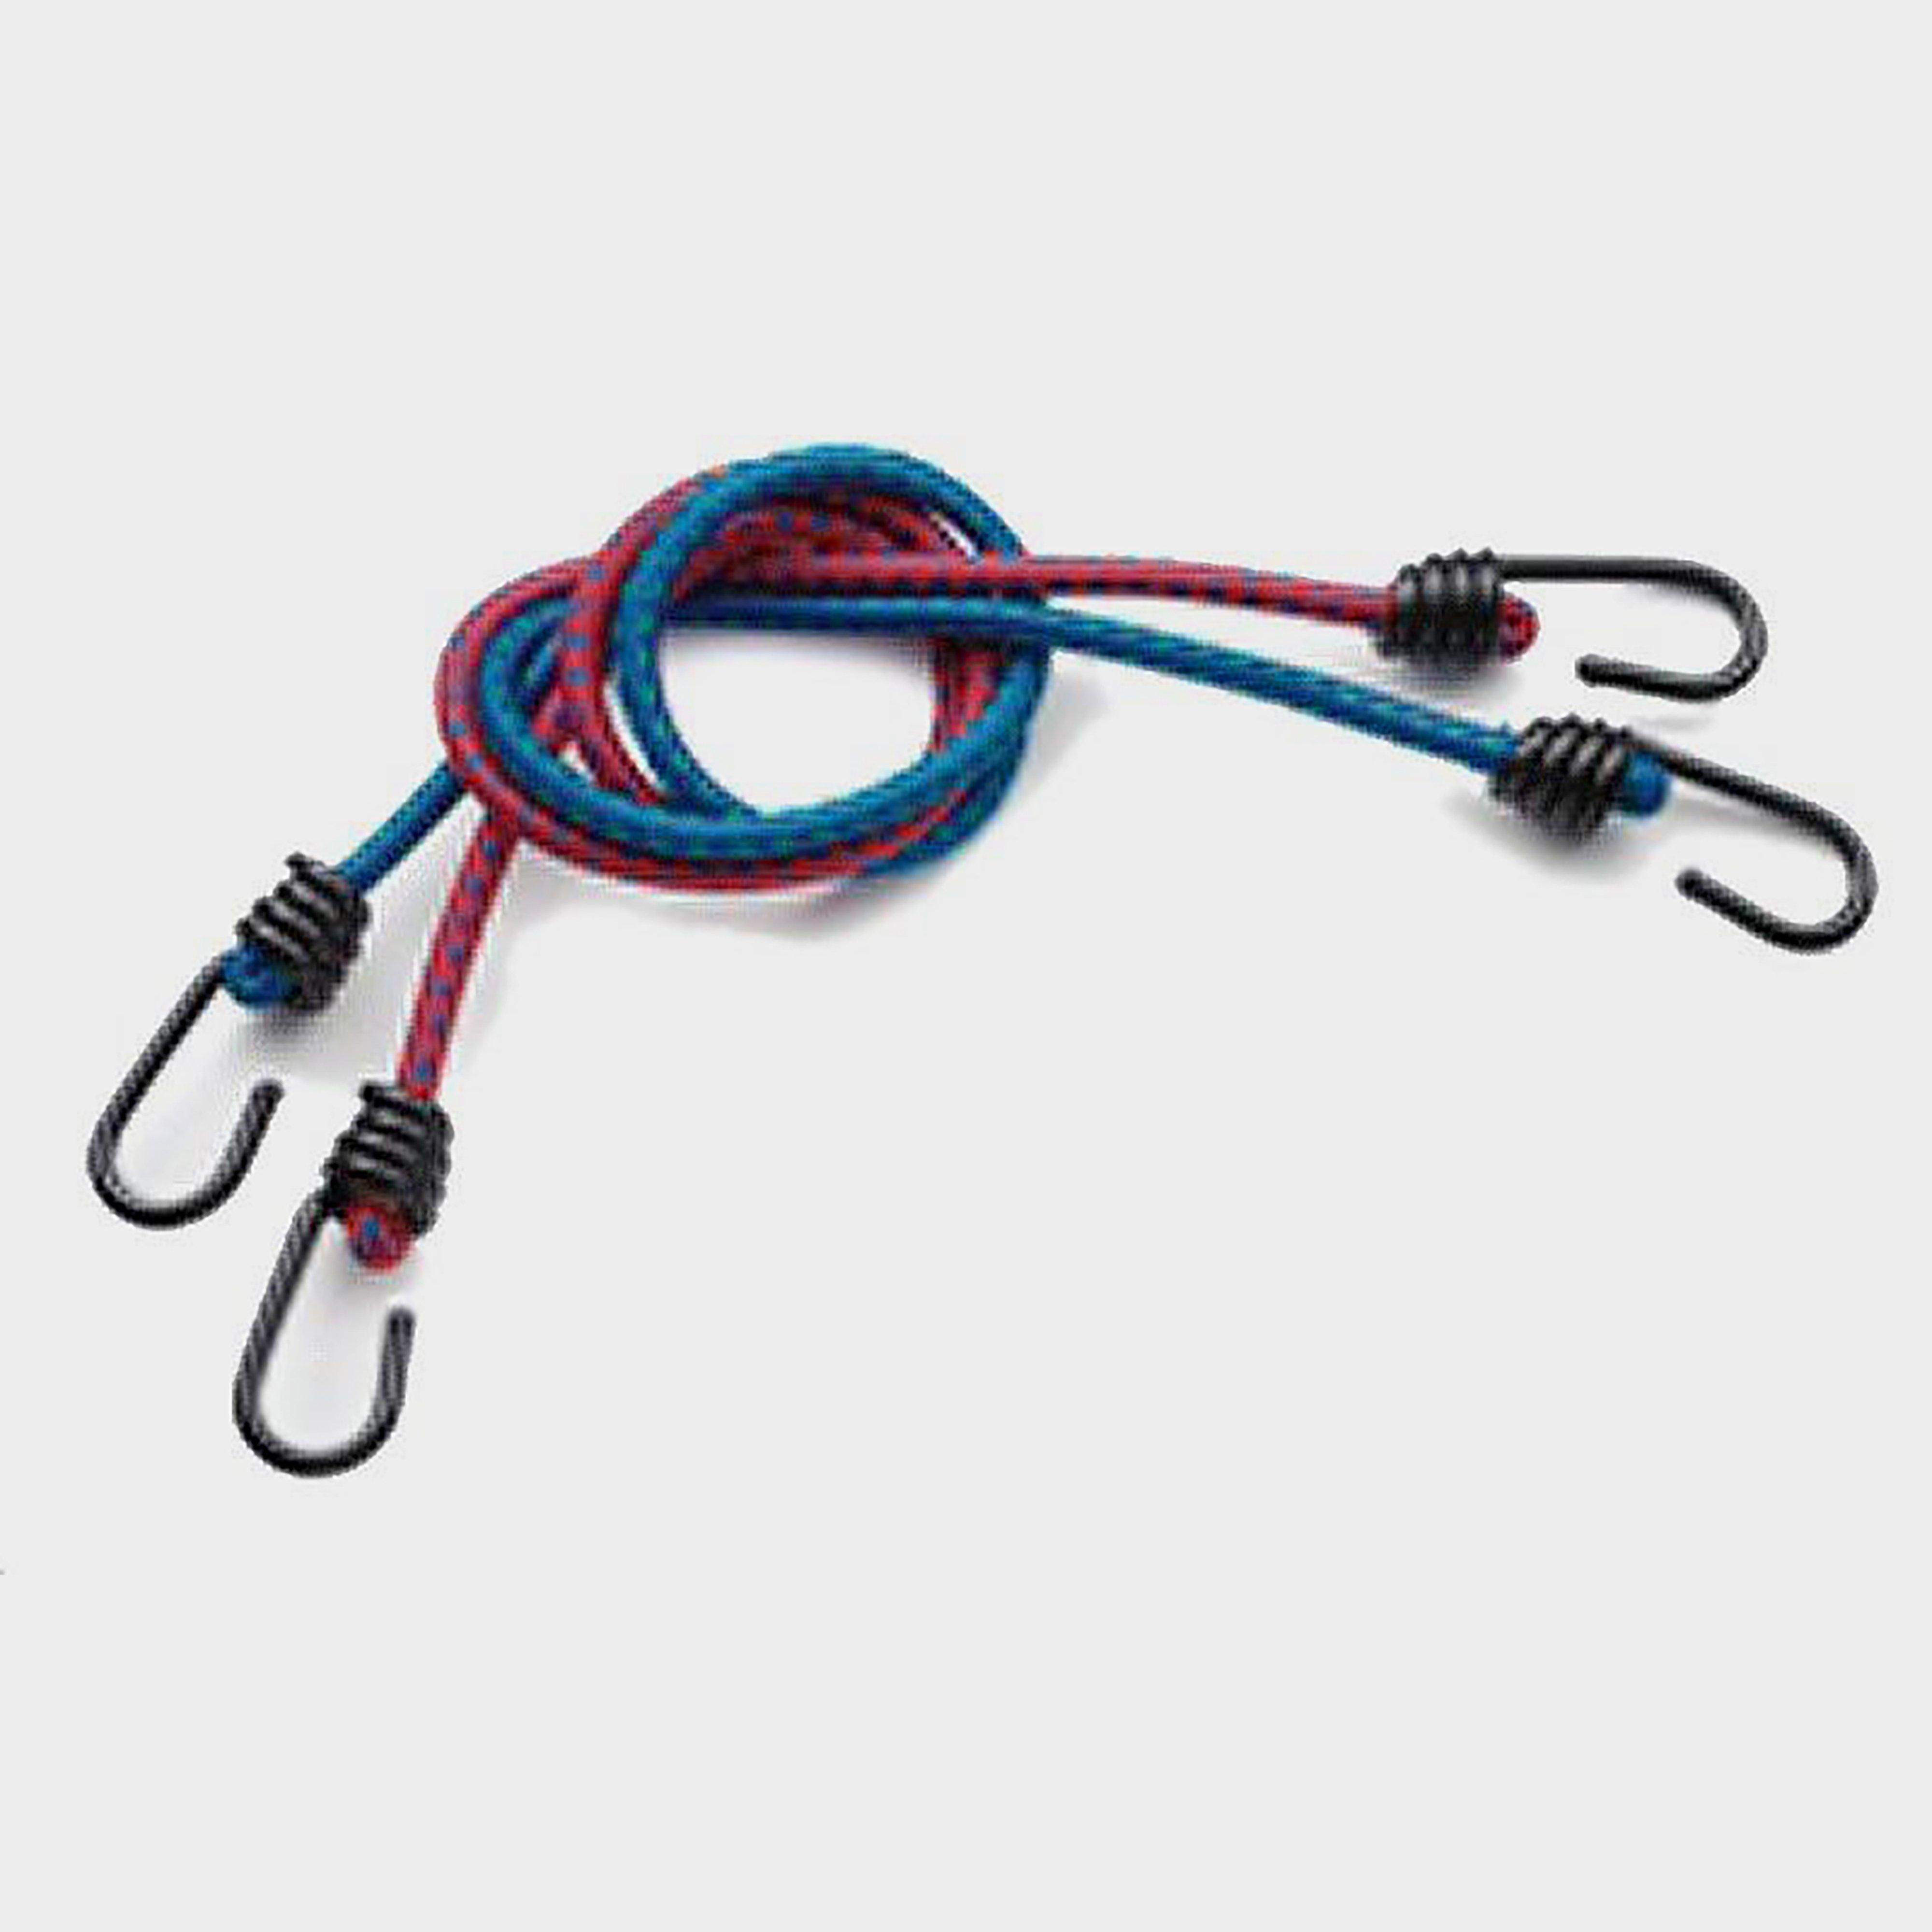 Streetwize Bungee Cords  36 (pair)  Multi Coloured